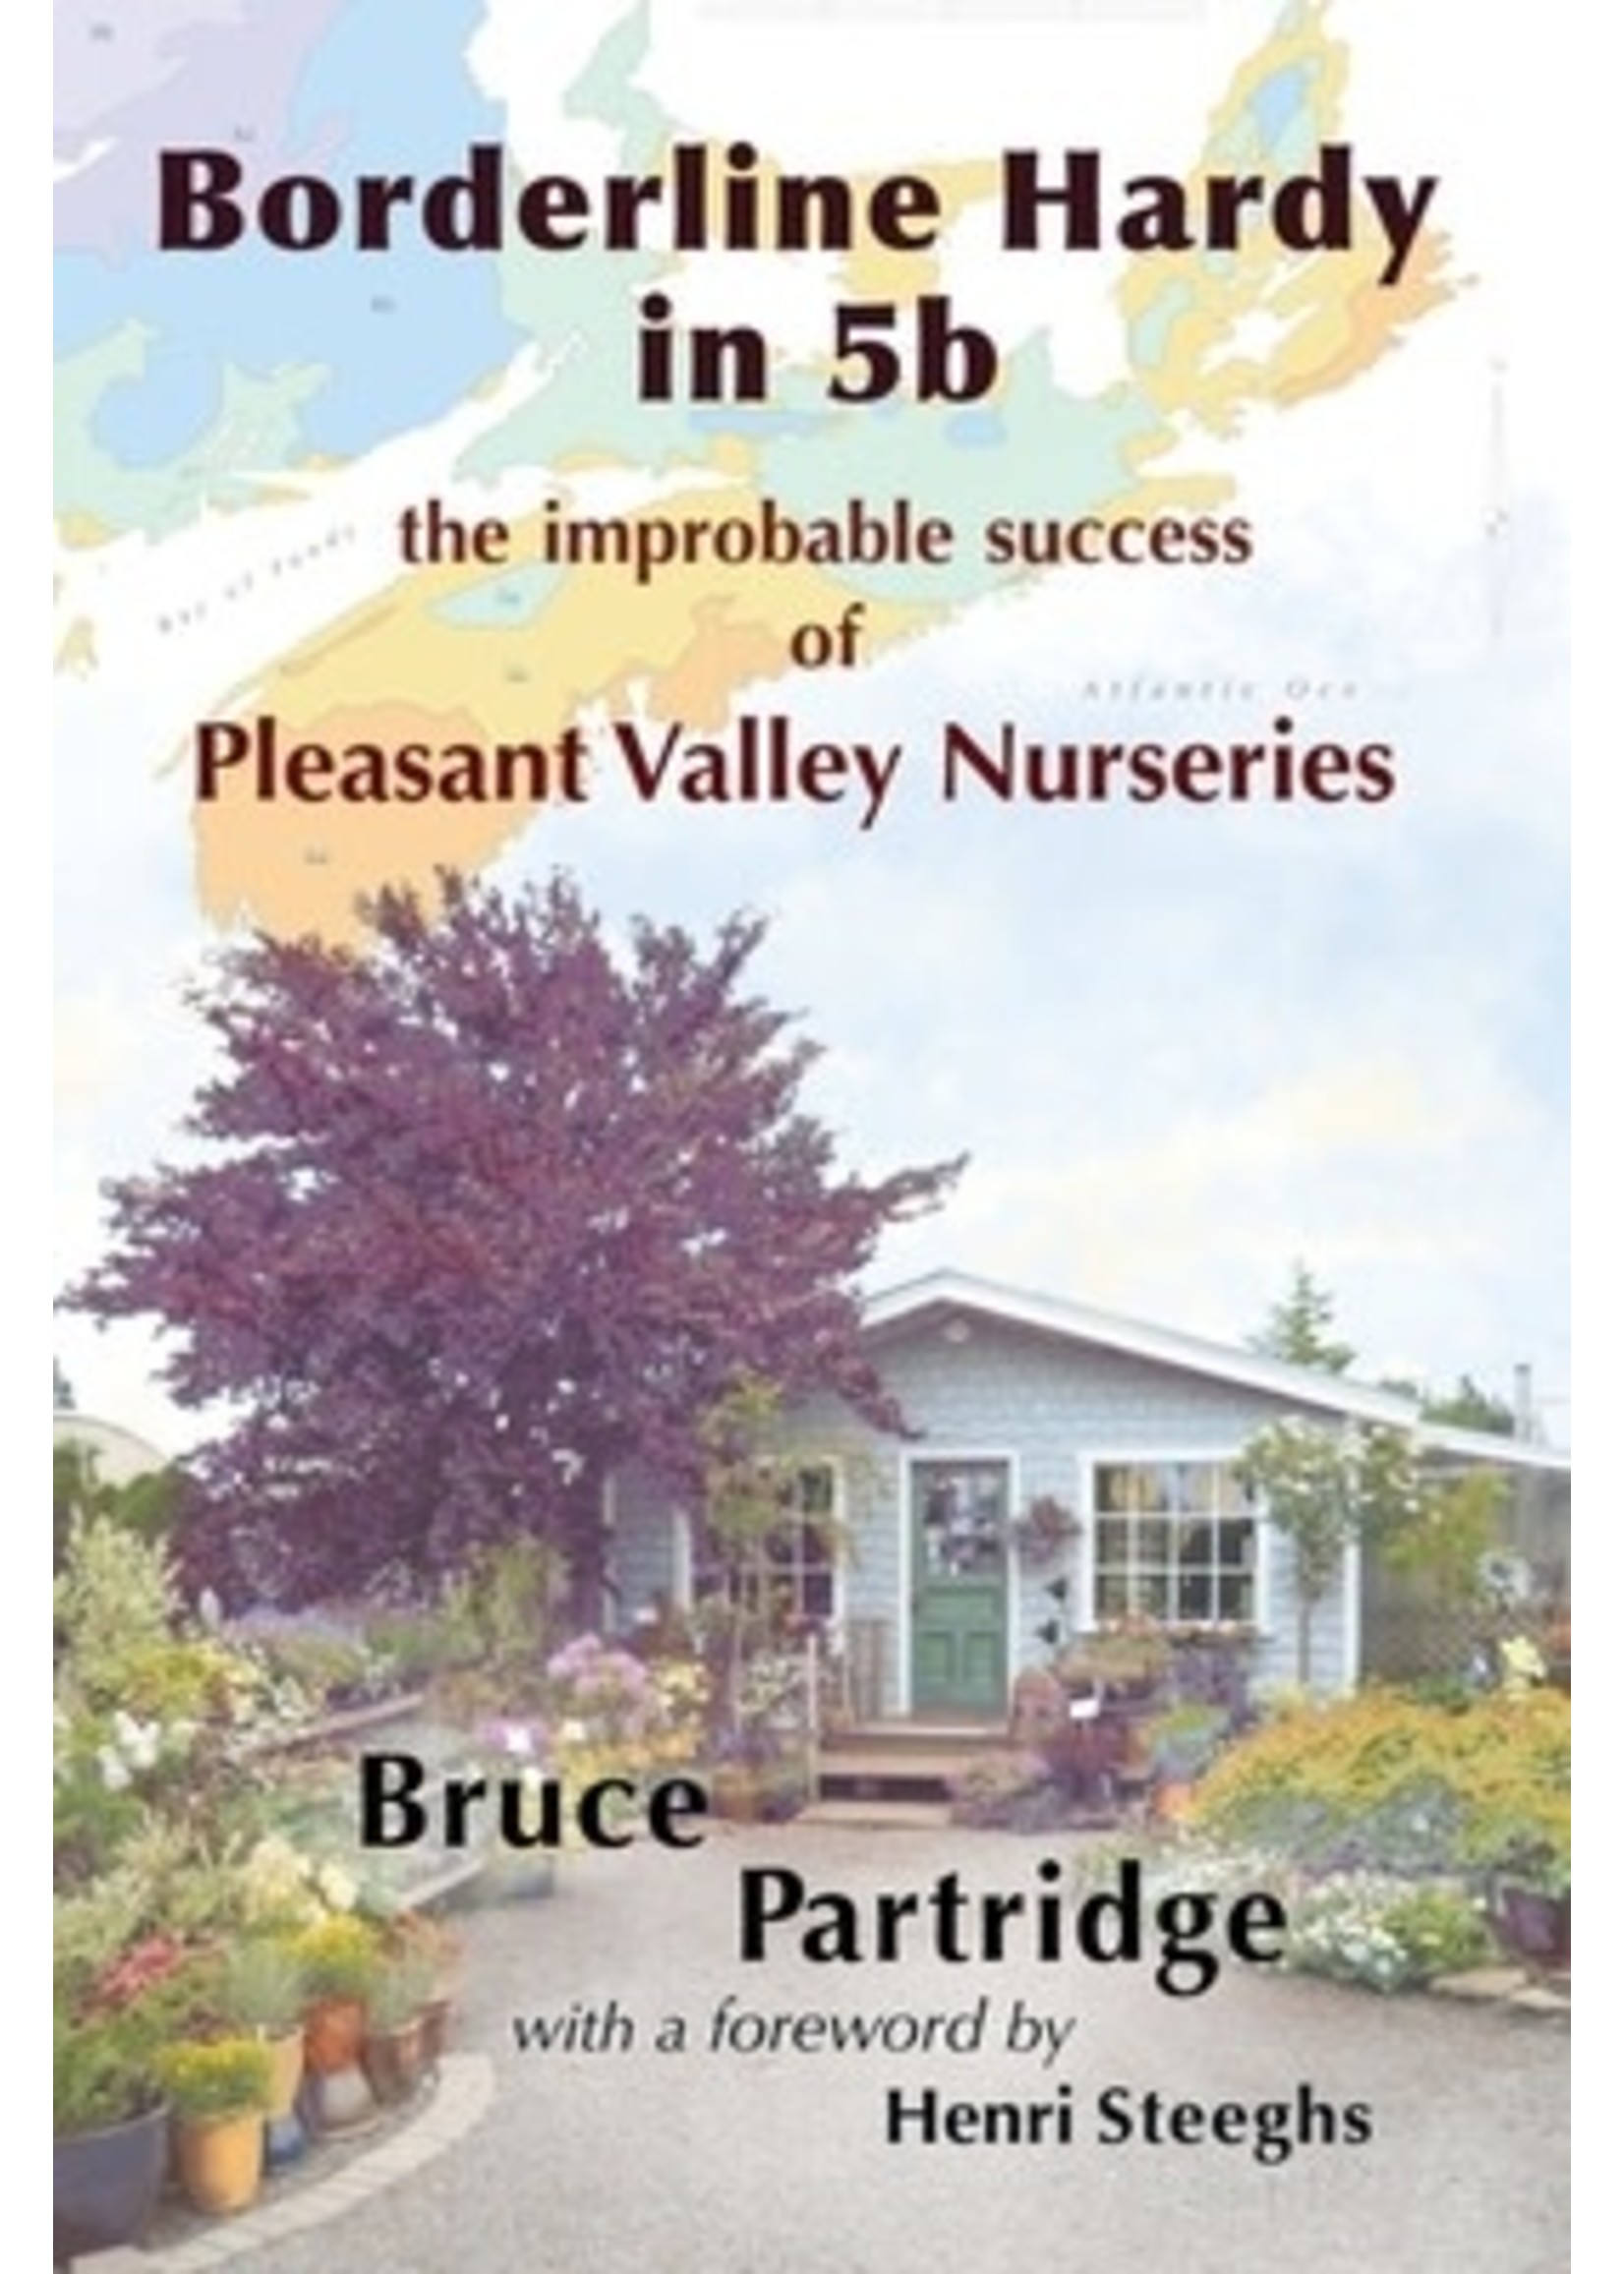 Borderline Hardy in 5b: The Improbable Success of Pleasant Valley Nurseries by Bruce Partridge